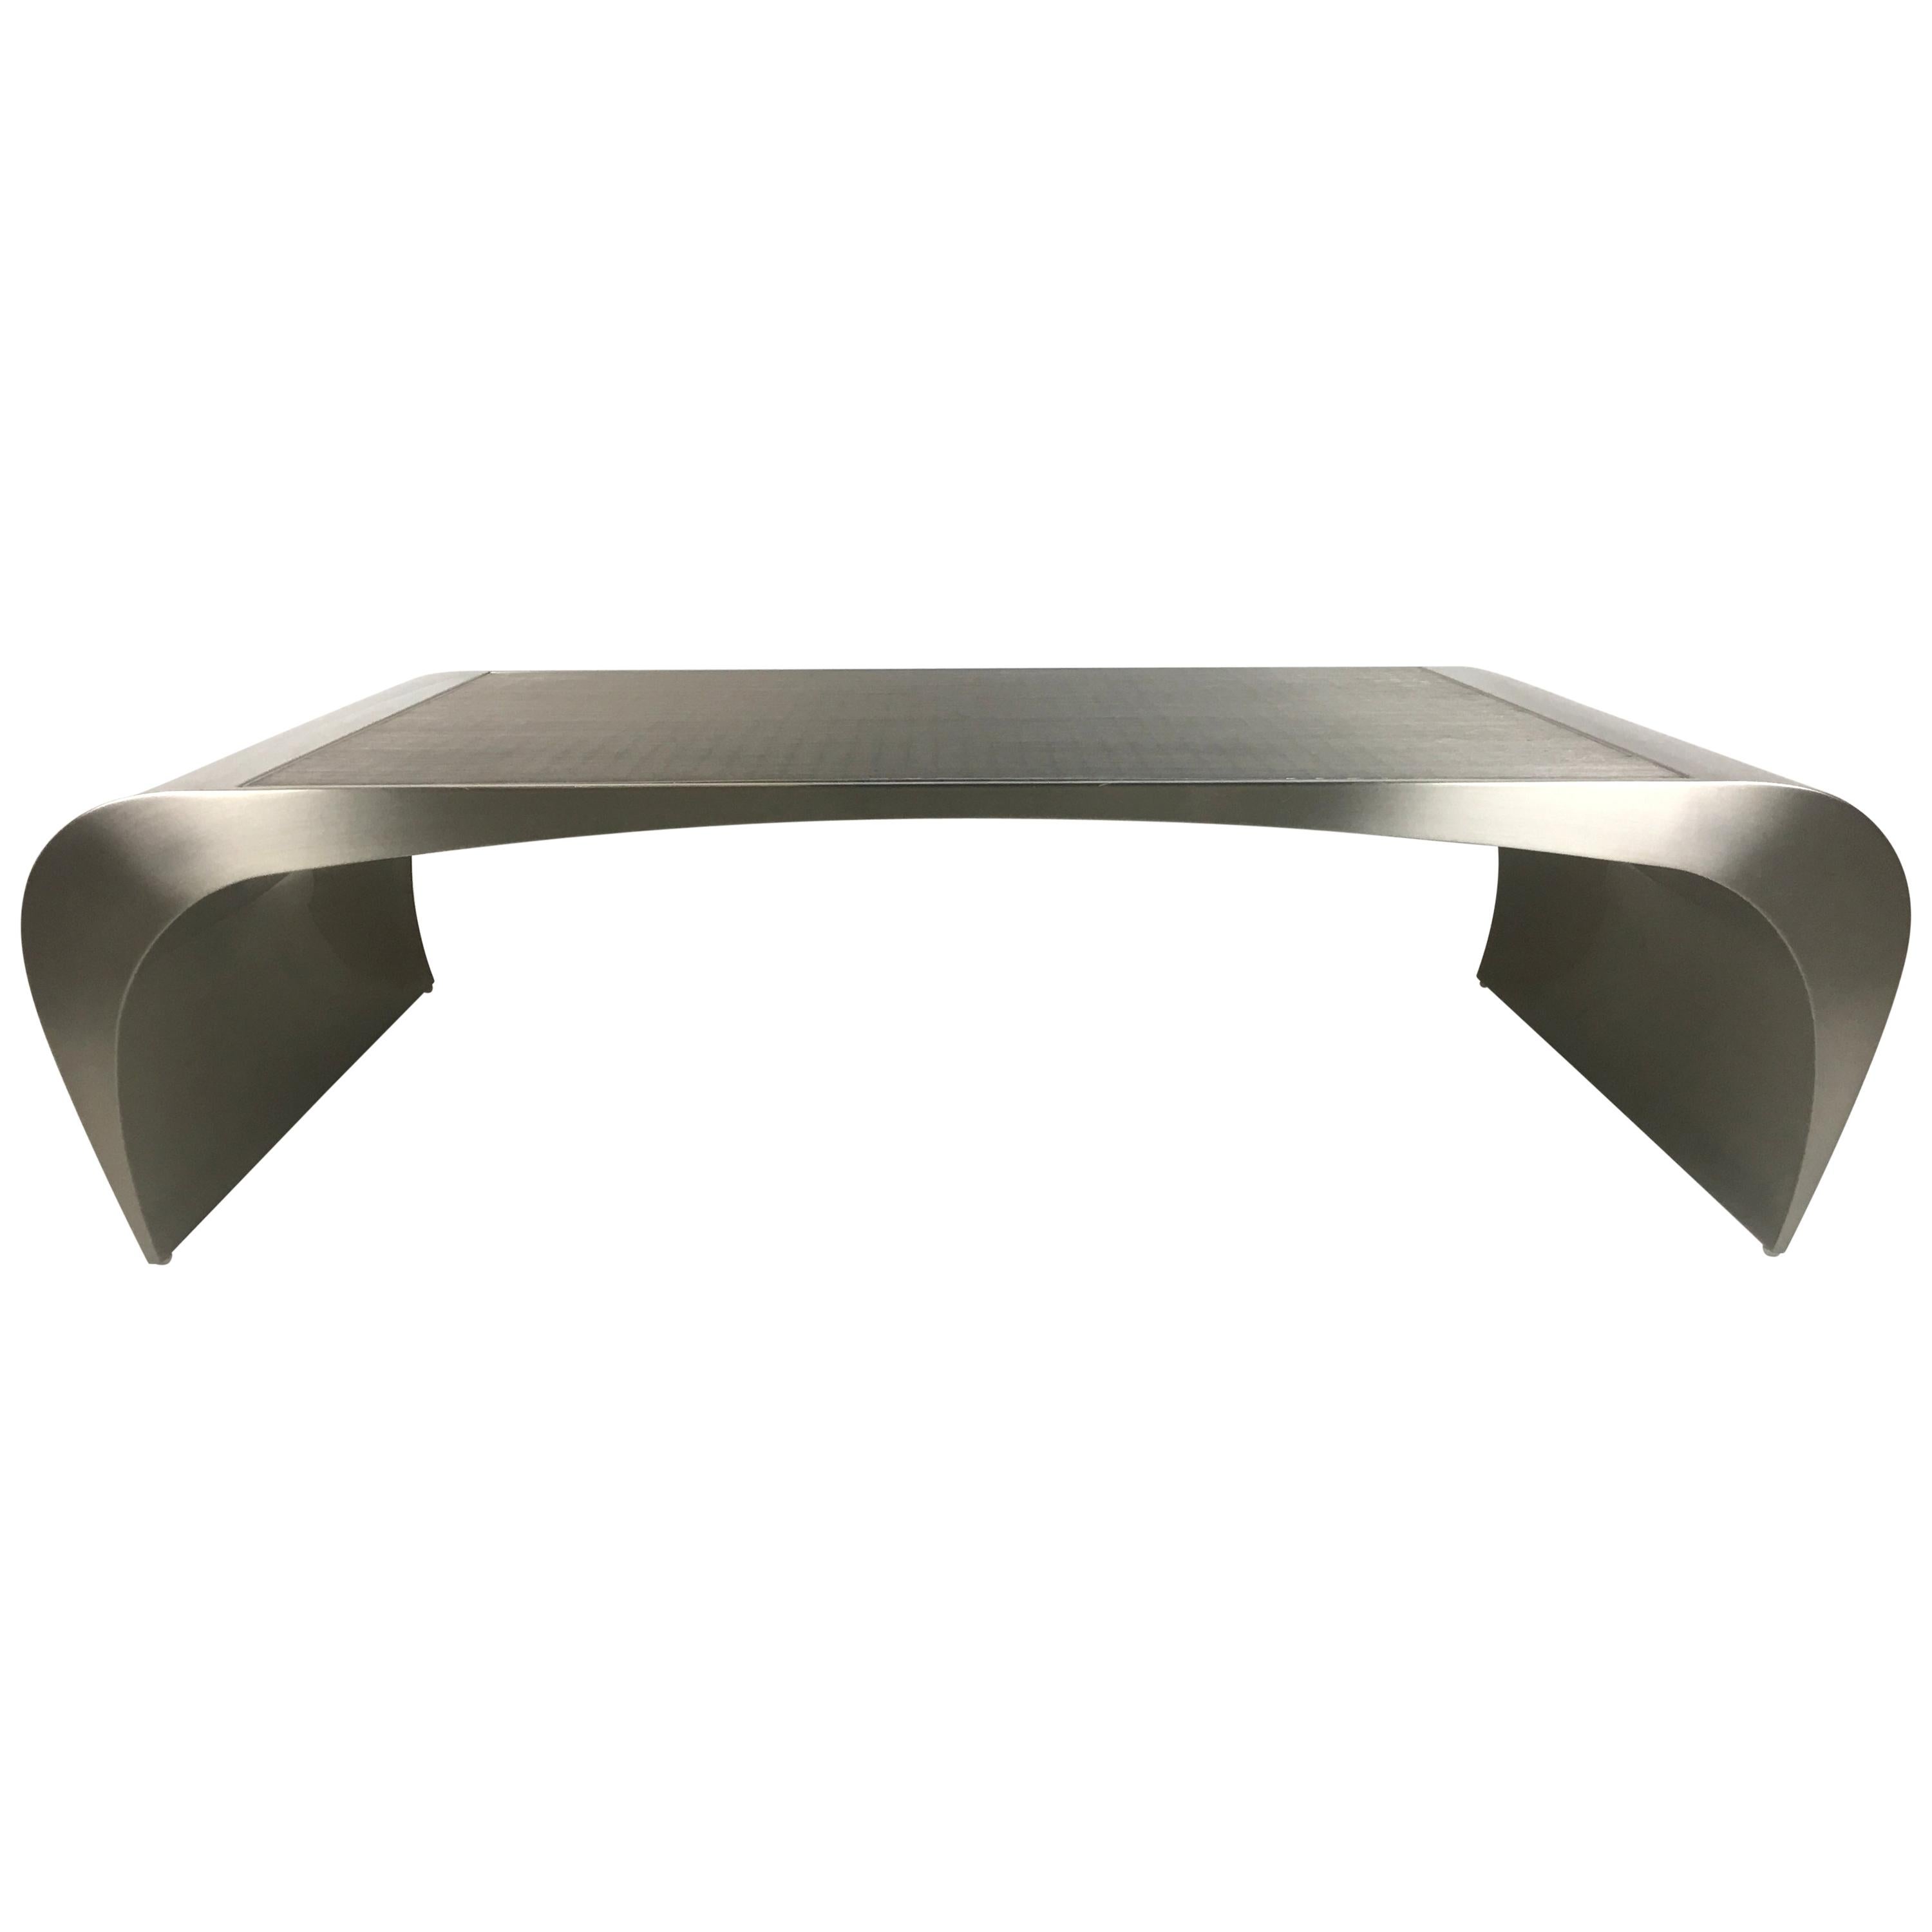 Large Scale Sculptural Coffee Table by Brueton